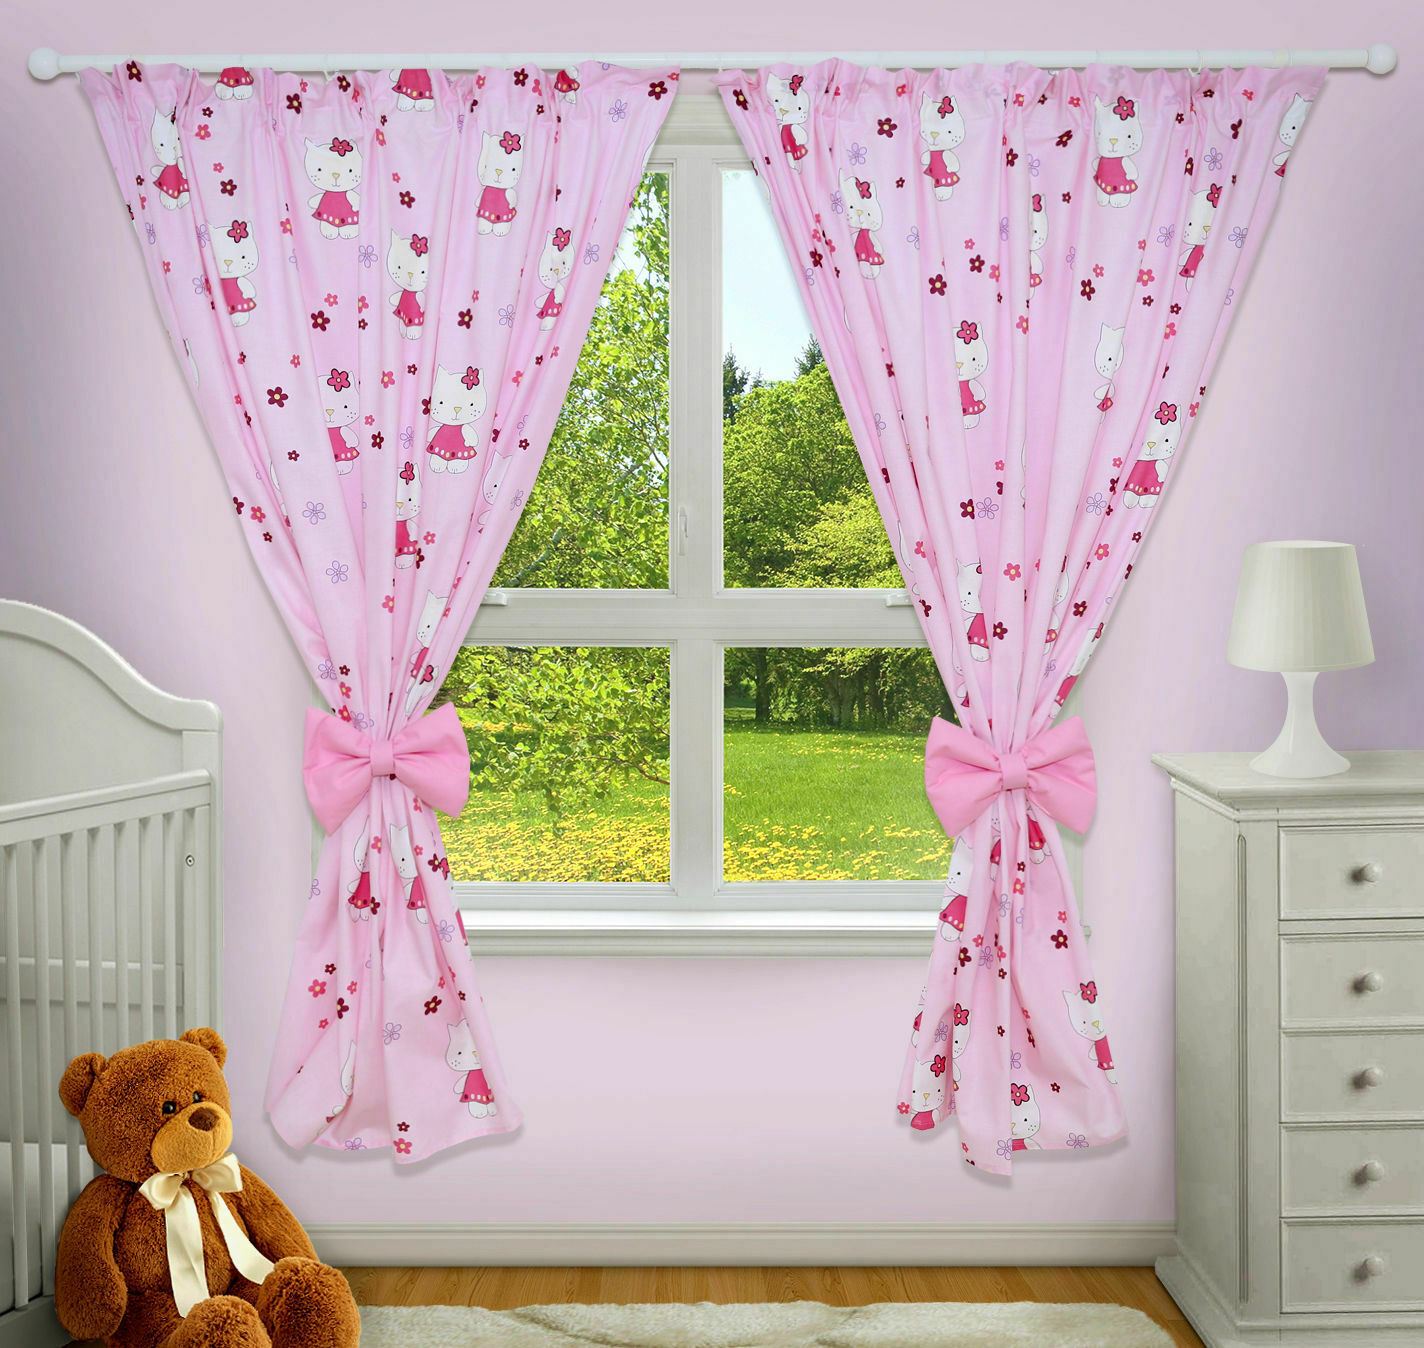 Nursery Curtains for Babies & Toddler's Bedroom Hello kitty